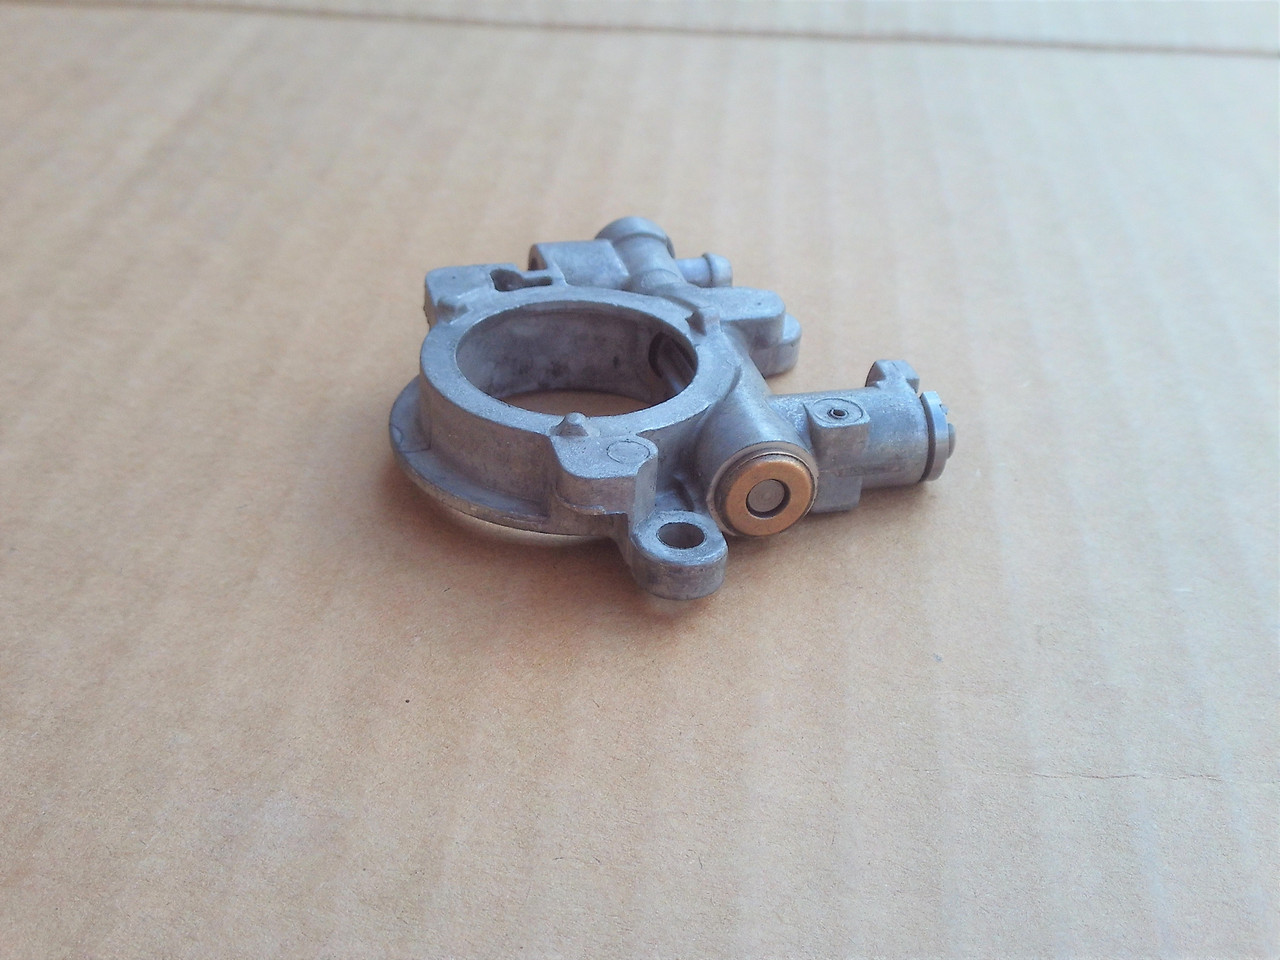 Stihl Oil Pump for 029 039 MS290 MS310 MS390 MS311 MS390 1127-640-3204 11276403204 1127 640 3204